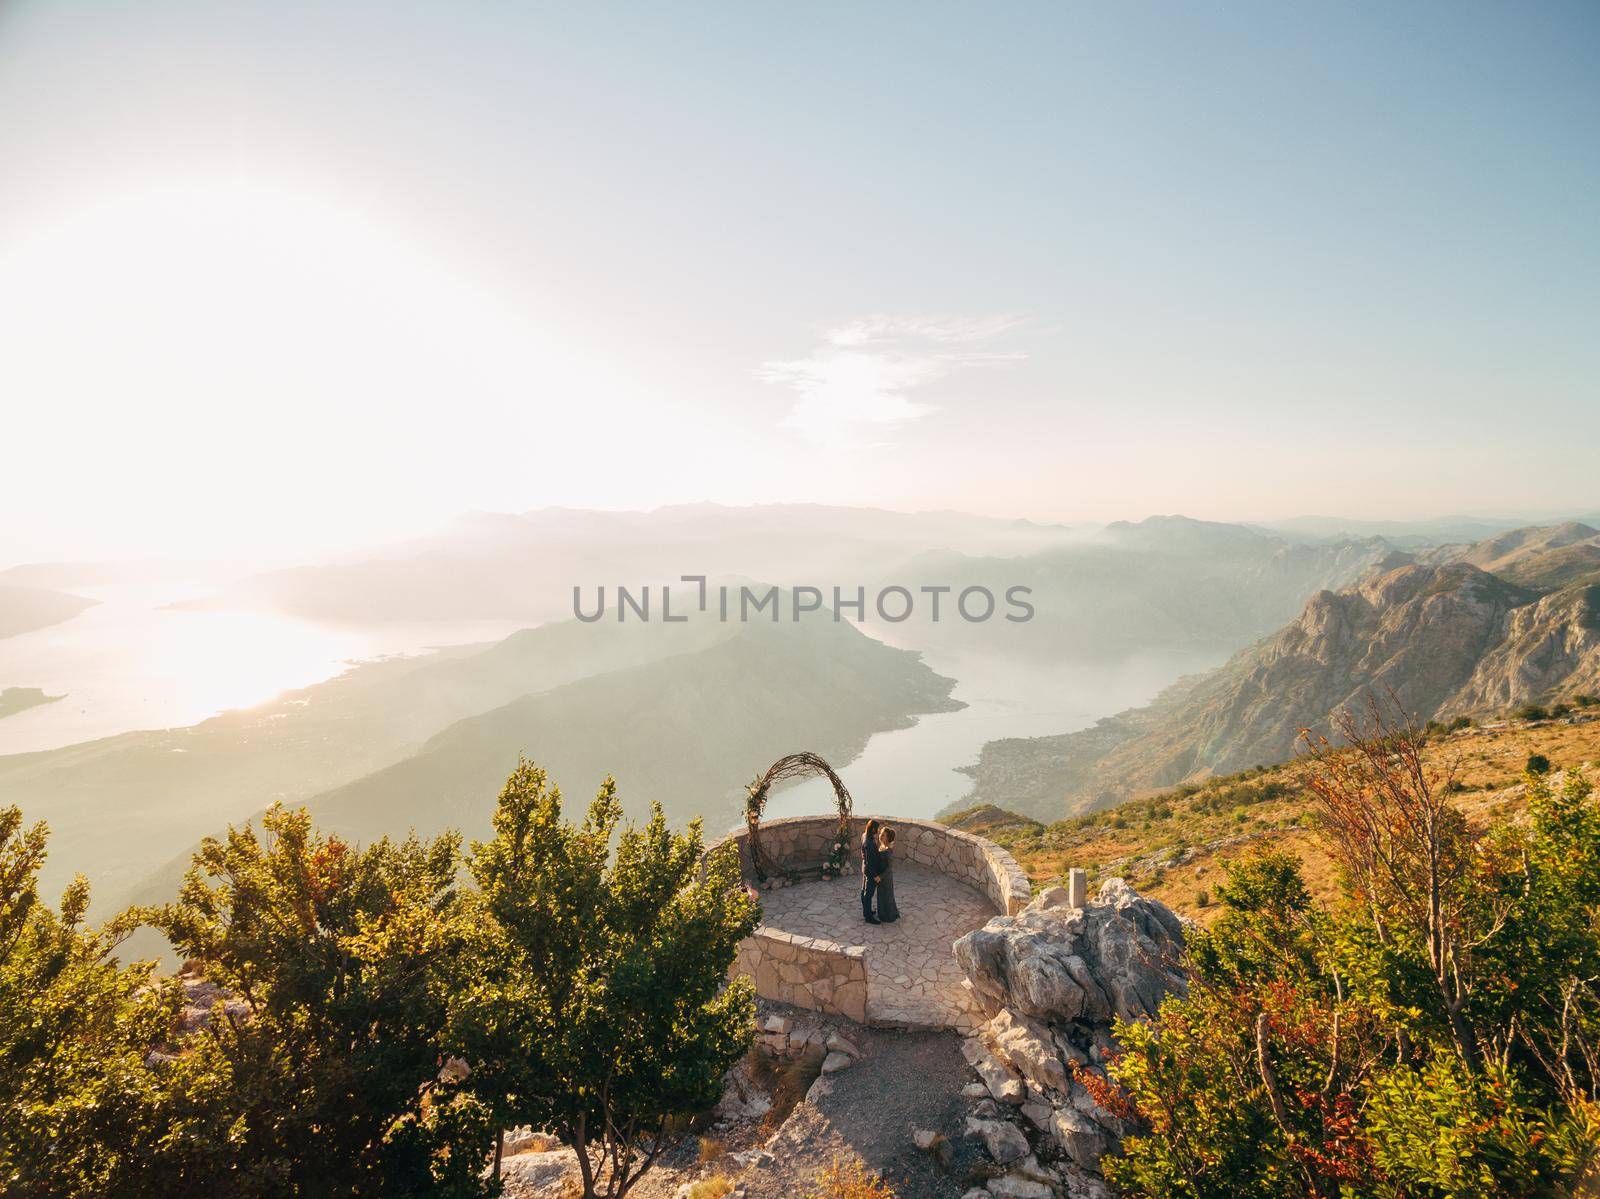 The bride and groom hug near the wedding arch on the observation deck on Mount Lovcen overlooking the Bay of Kotor . High quality photo